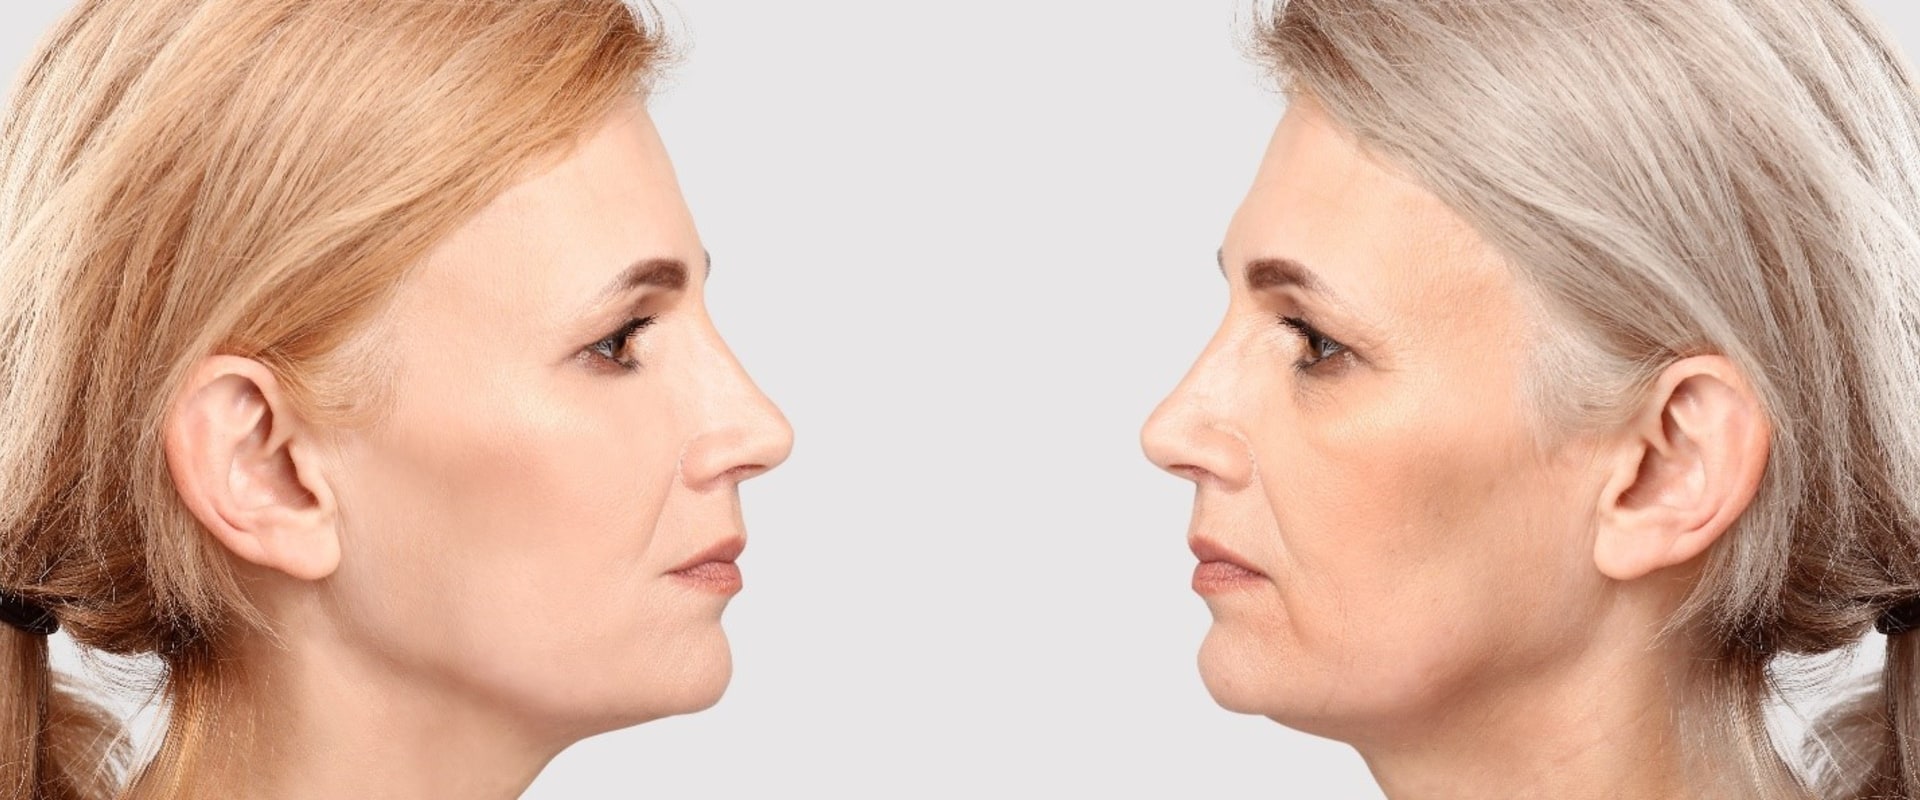 Facial Fillers by Flawless Faces For Younger-Looking You